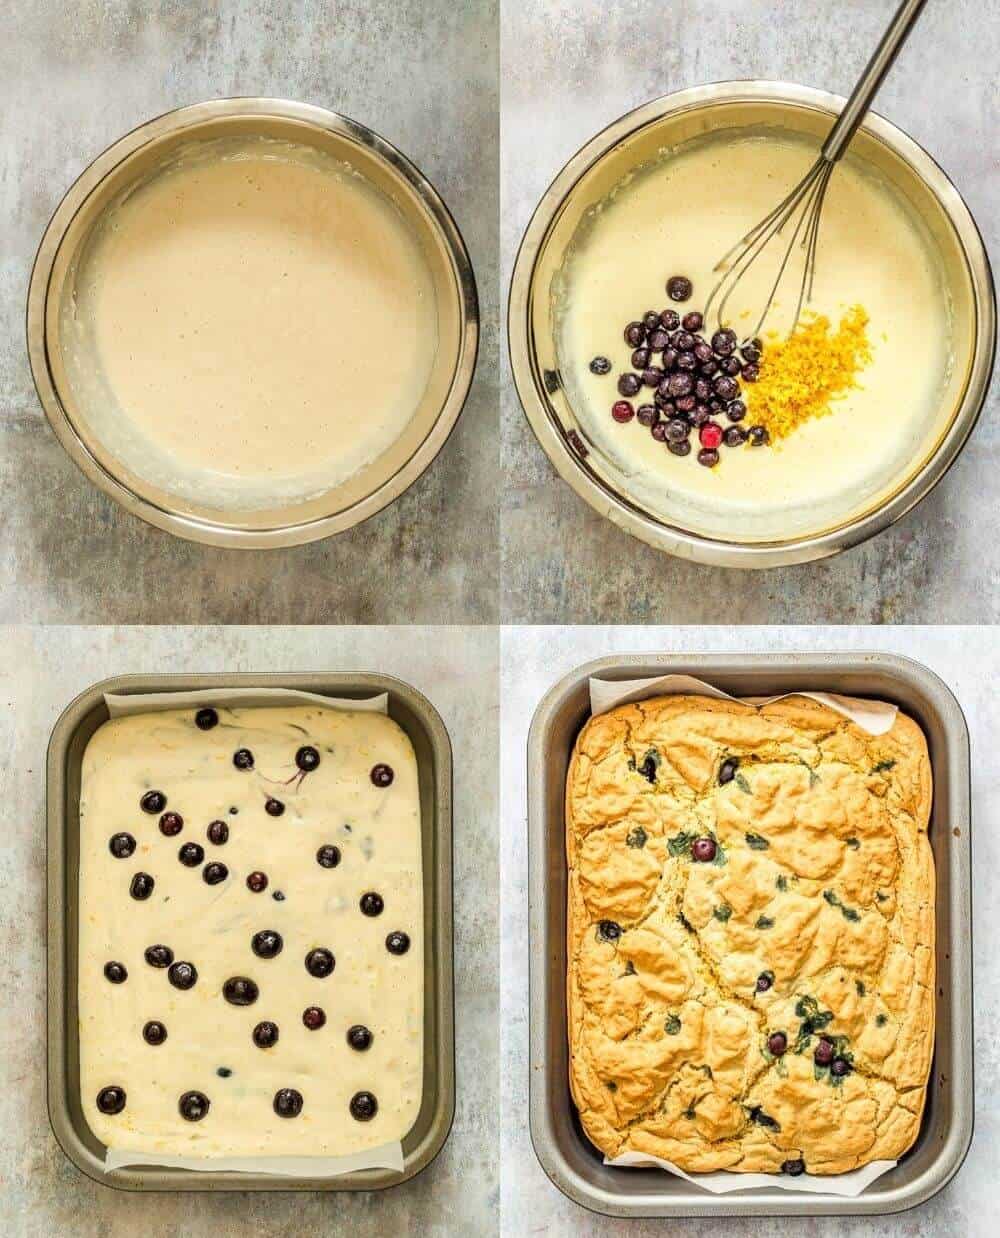 The process of make baked blueberry pancakes: 1. Combine pancake ingredients in a bowl. 2. Add in Blueberries and Lemon Zest. 3. Pour into a sheet pan. 4. Bake.